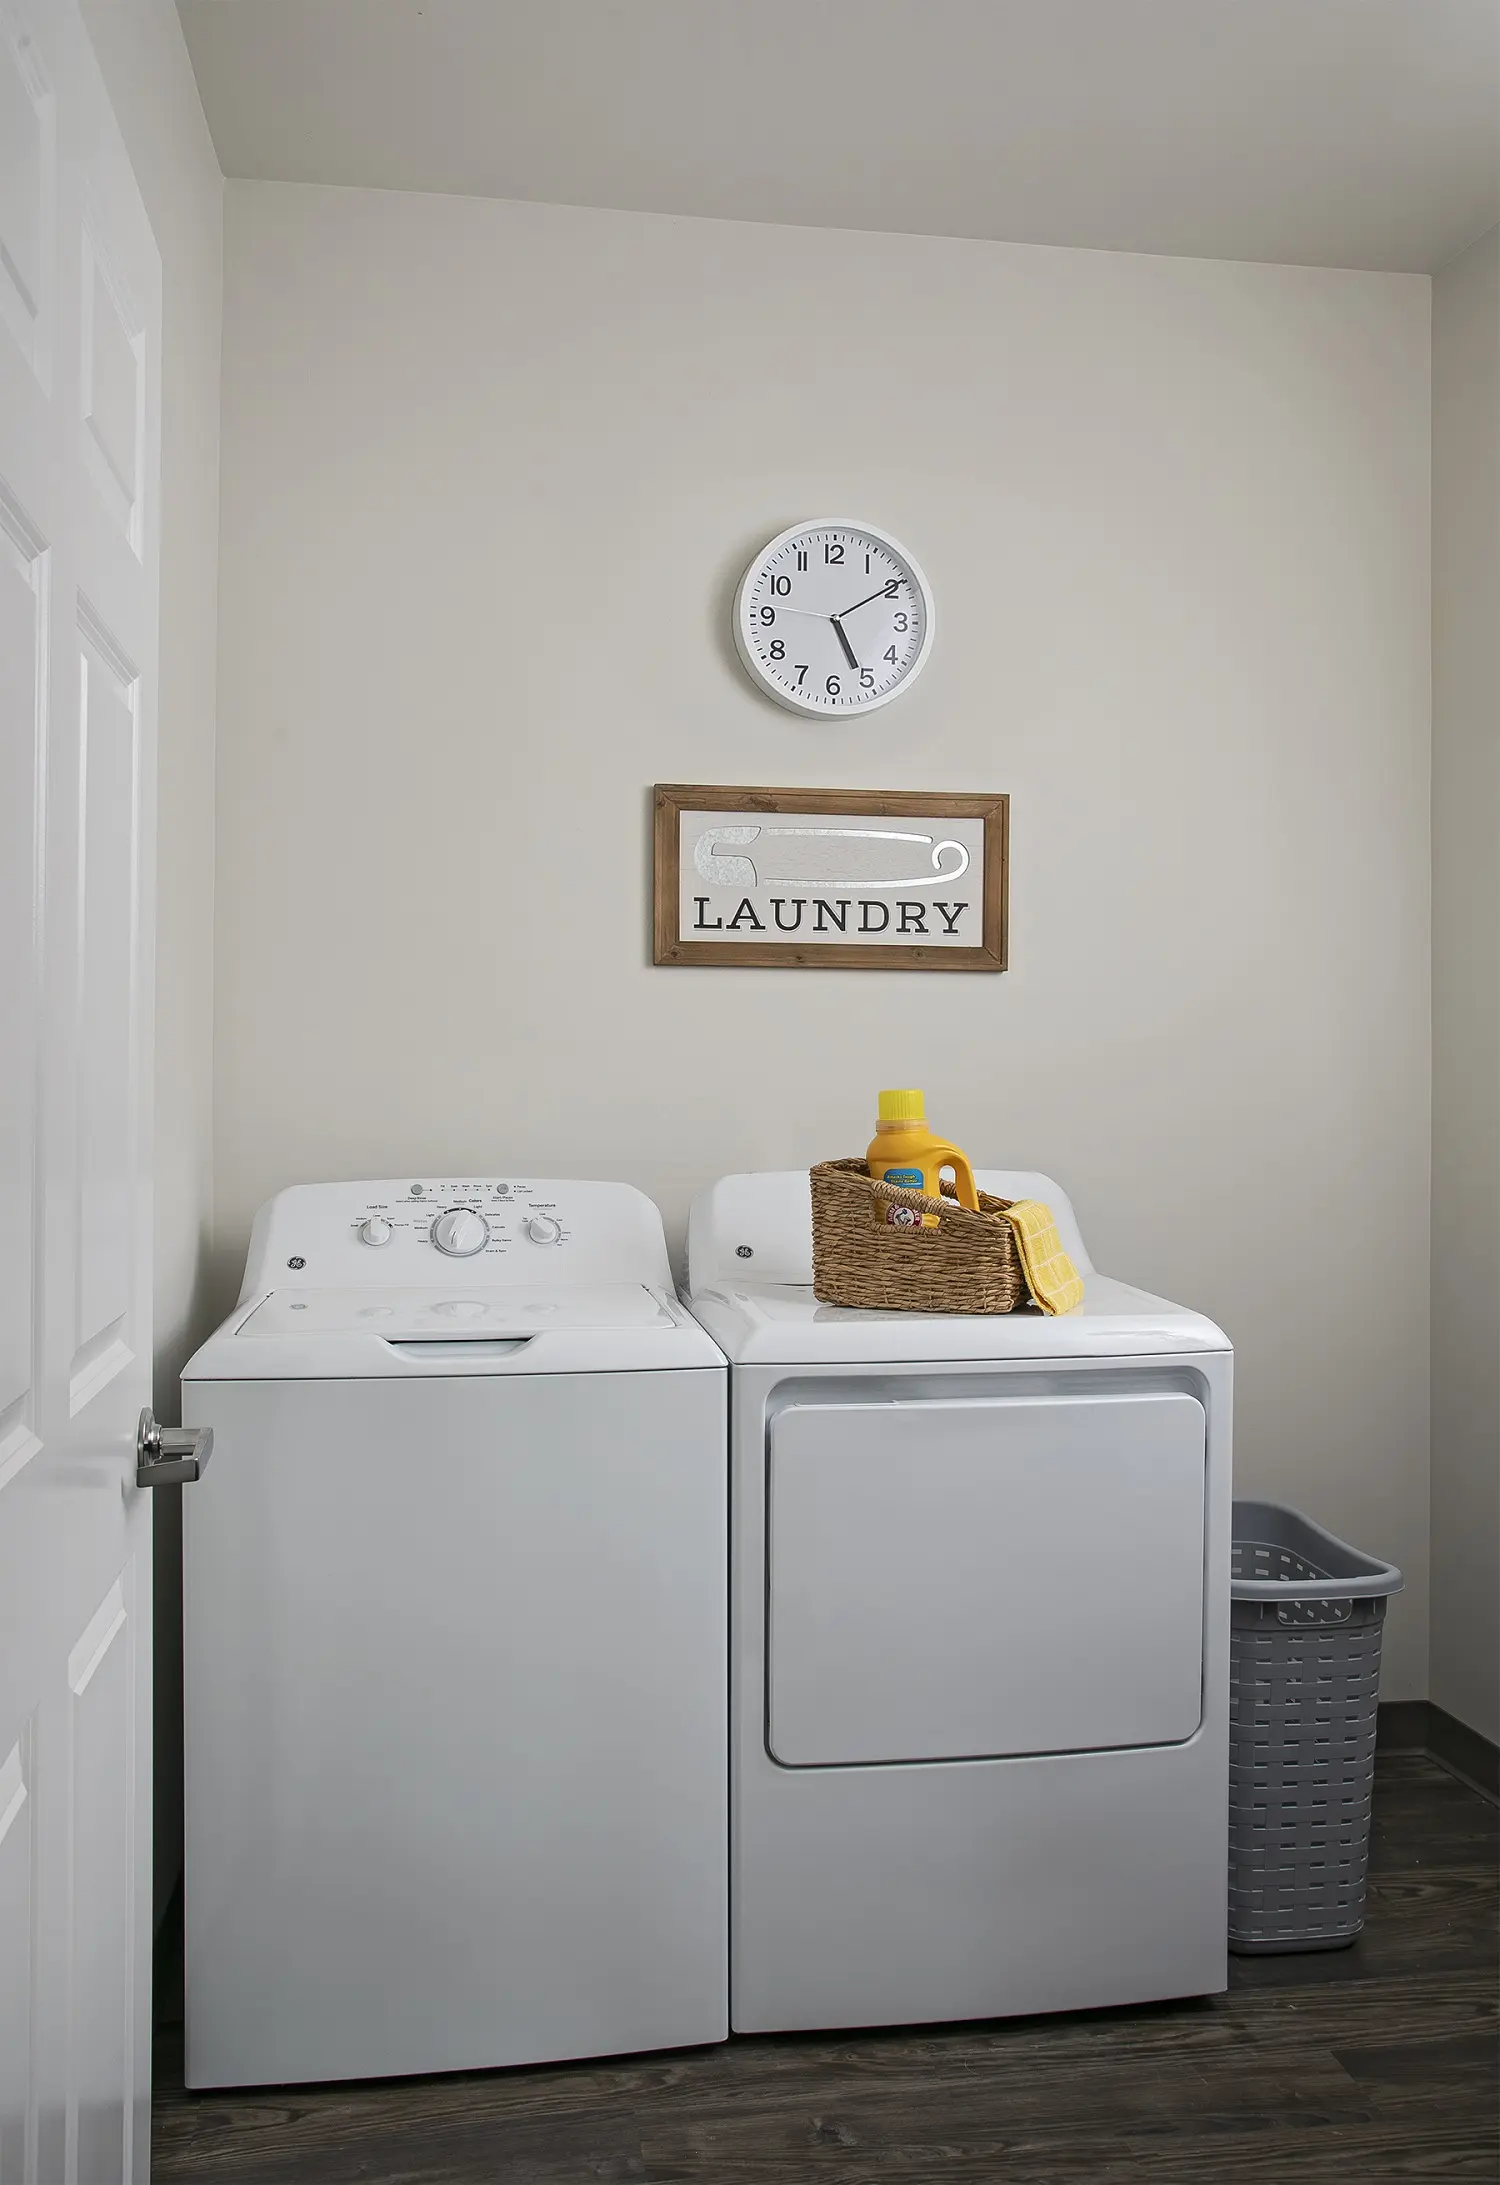 Laundry room of a senior apartment at American House East I Villas, an Independent senior living community in Roseville, Michigan